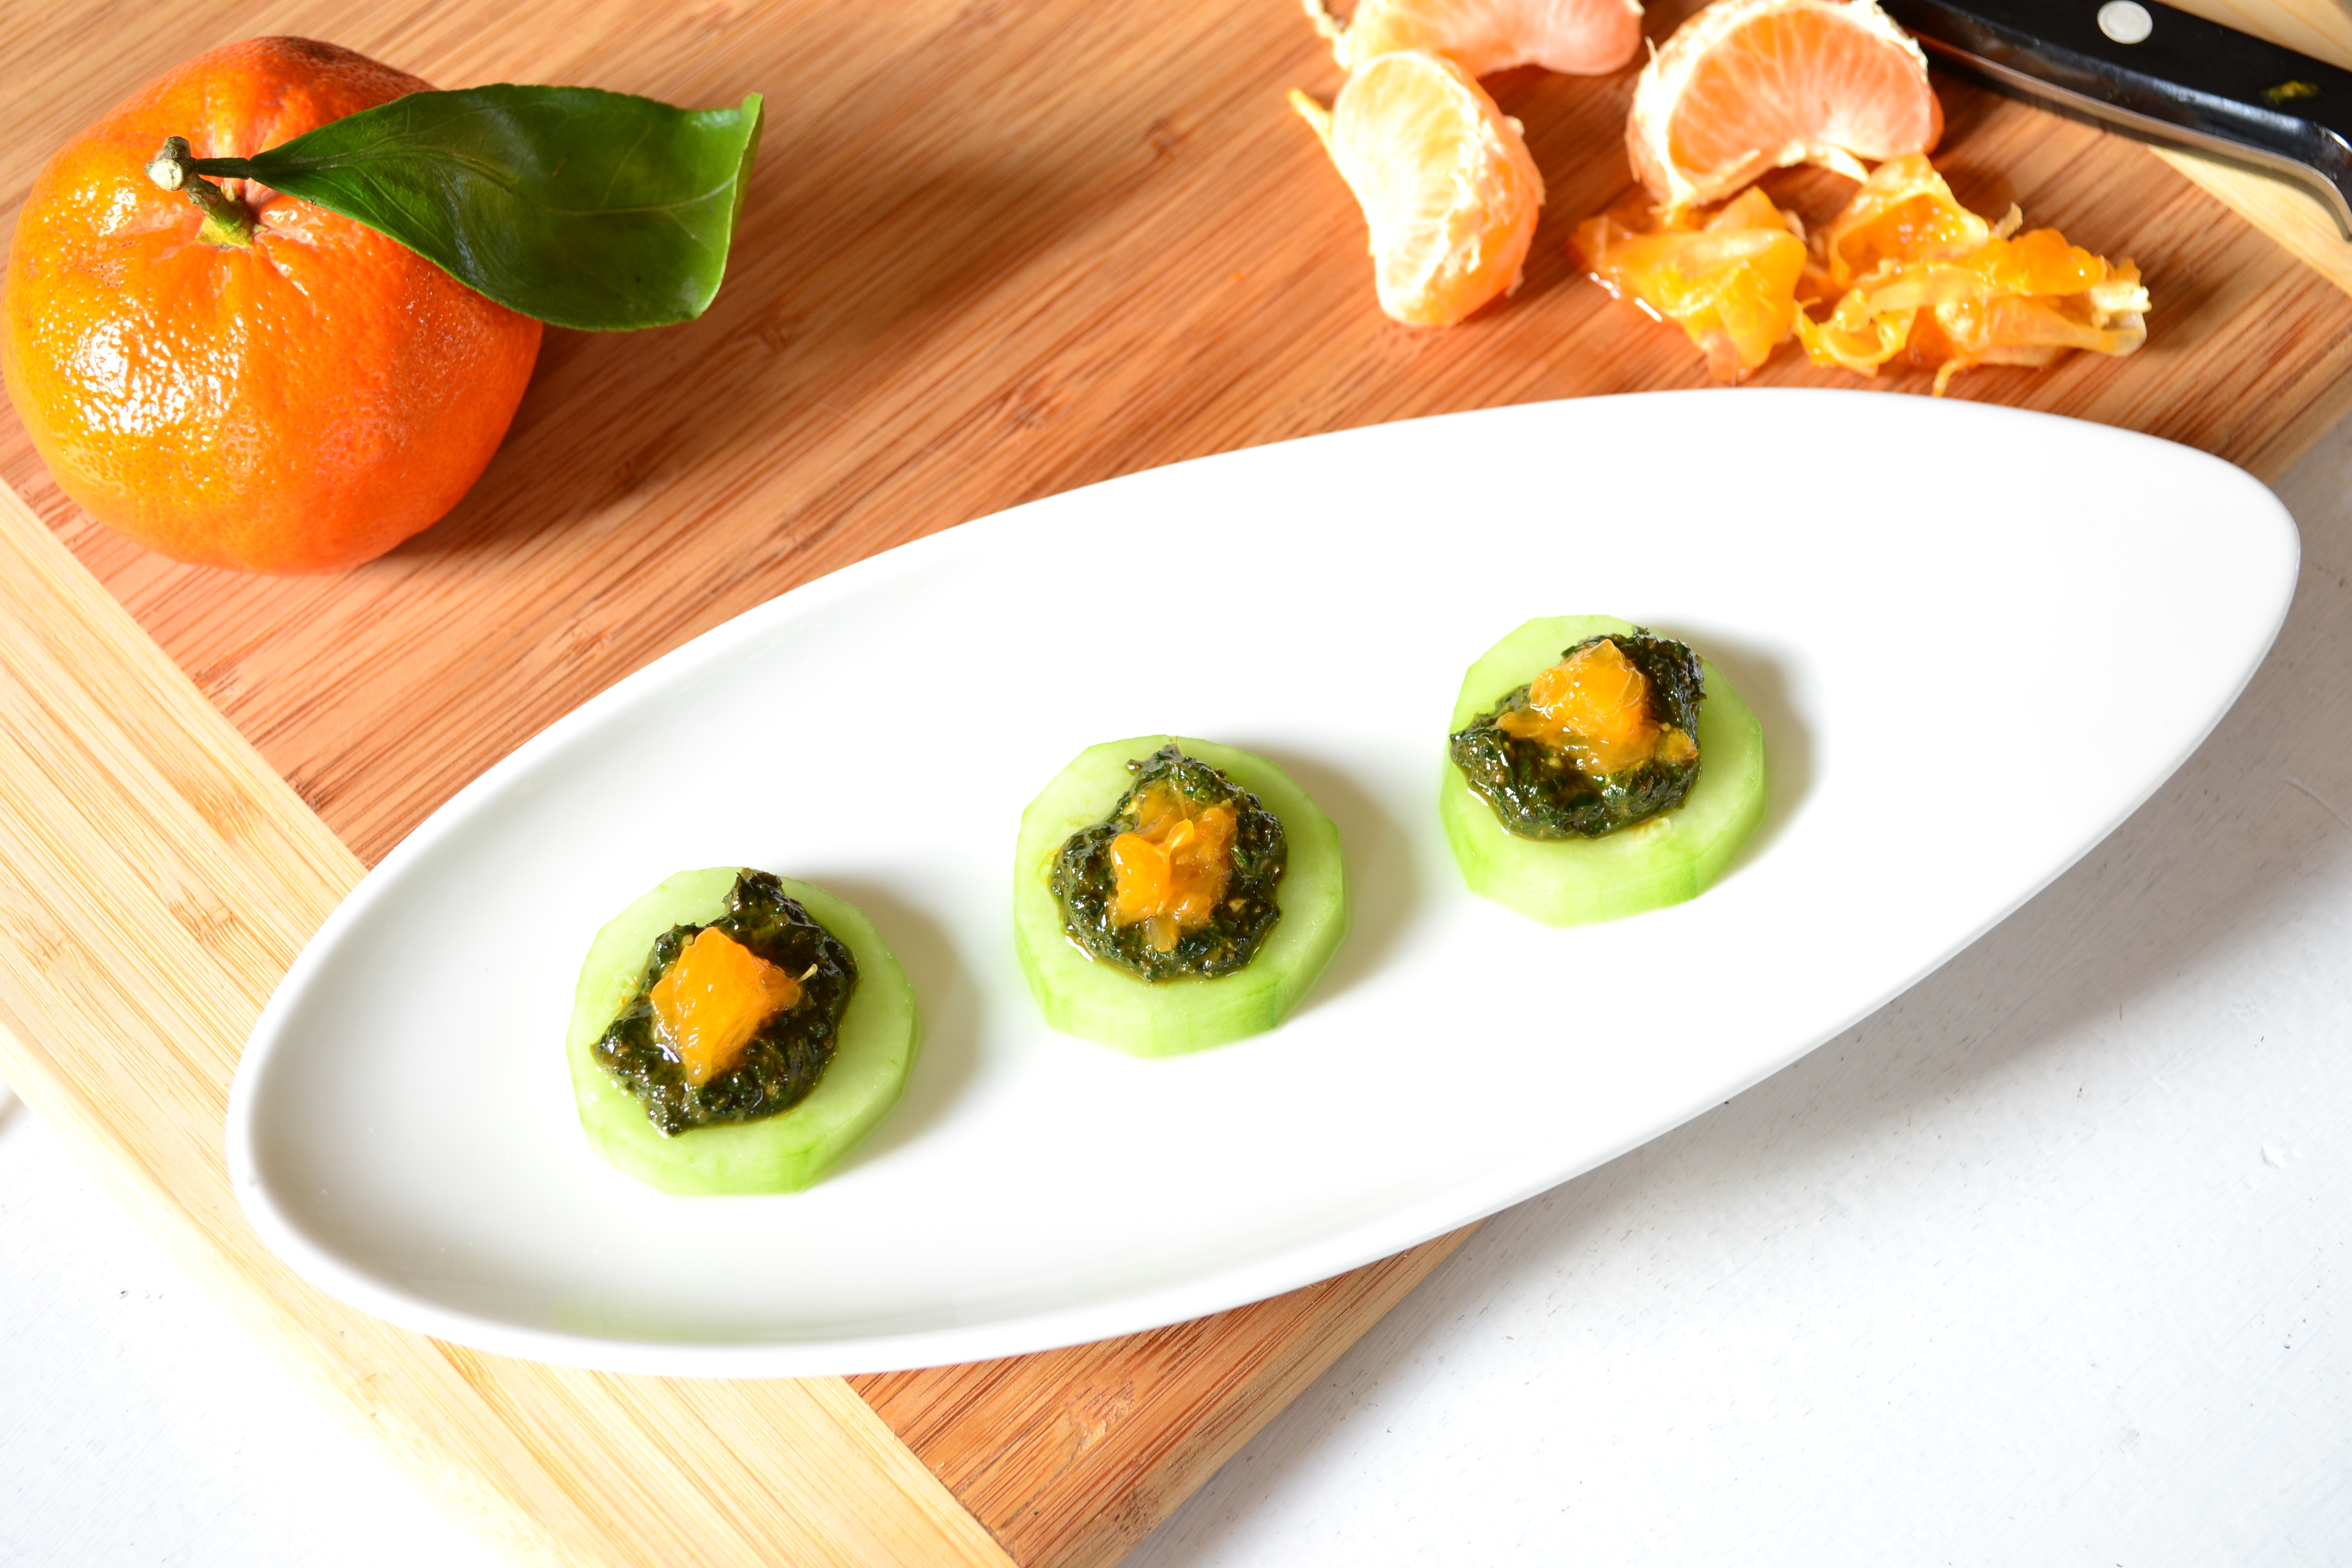 cucumber, pesto & mandarin: a marriage made in green with a touch of orange